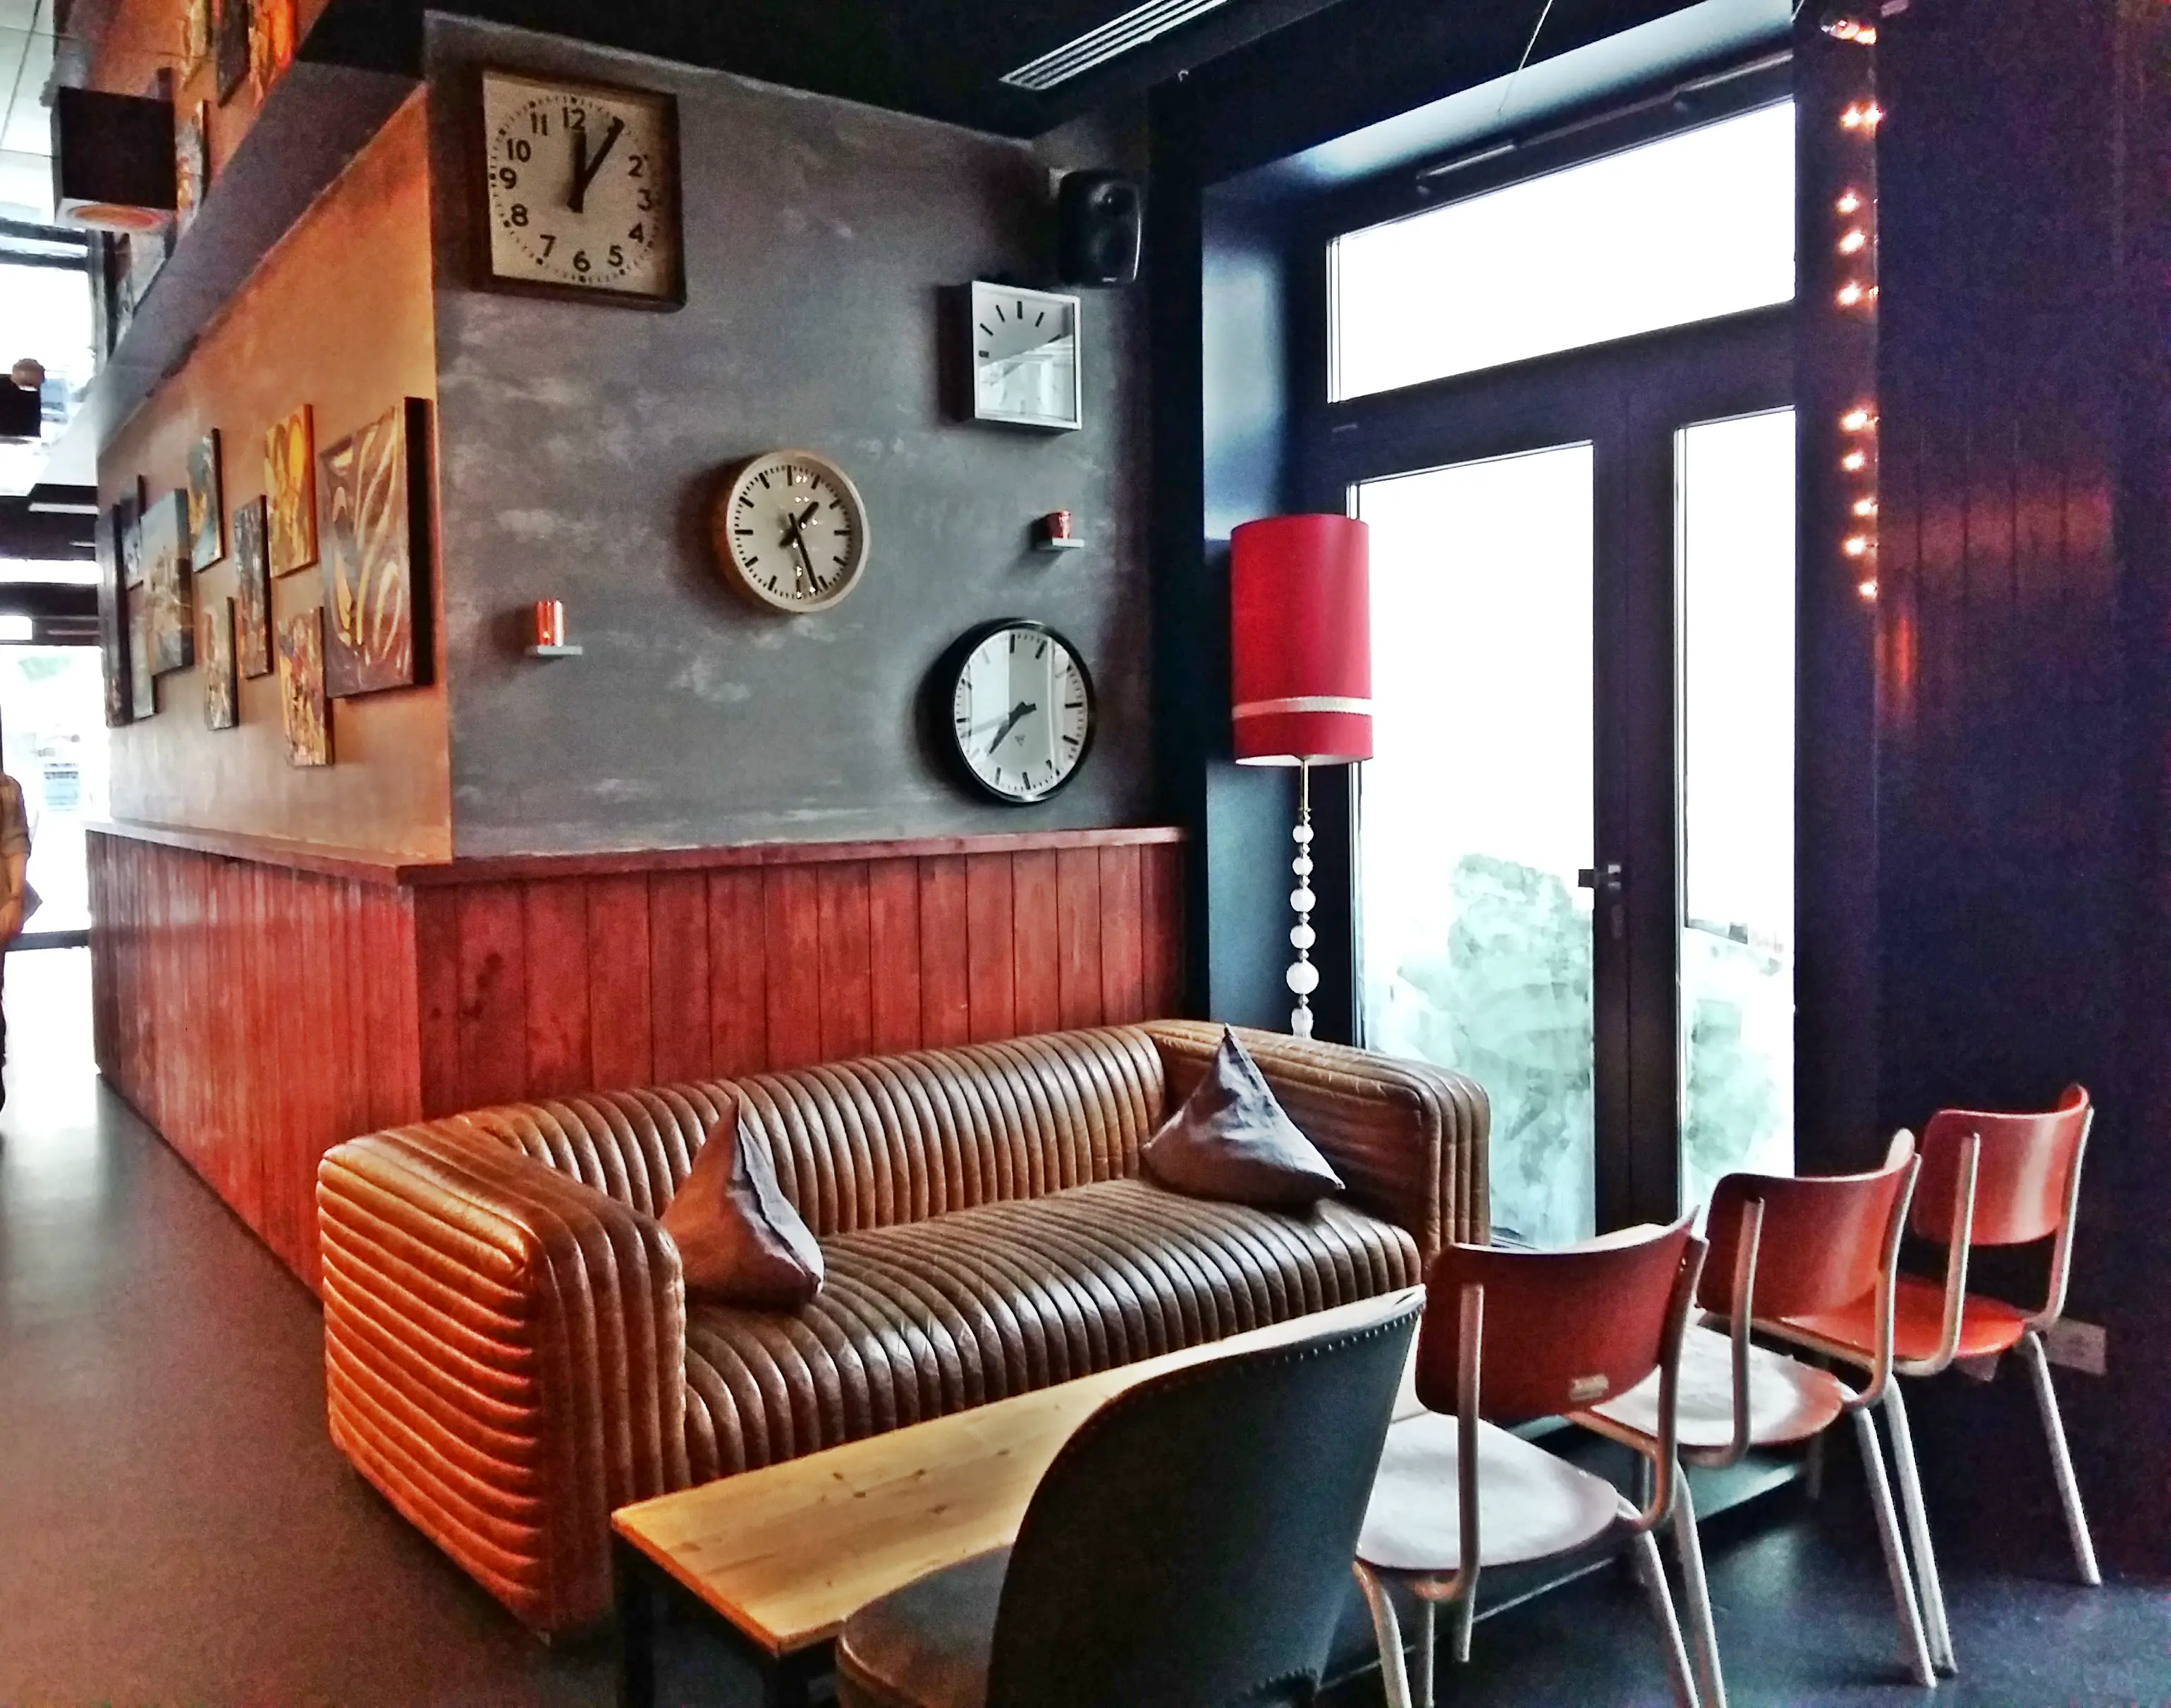 Where to stay in Berlin city center